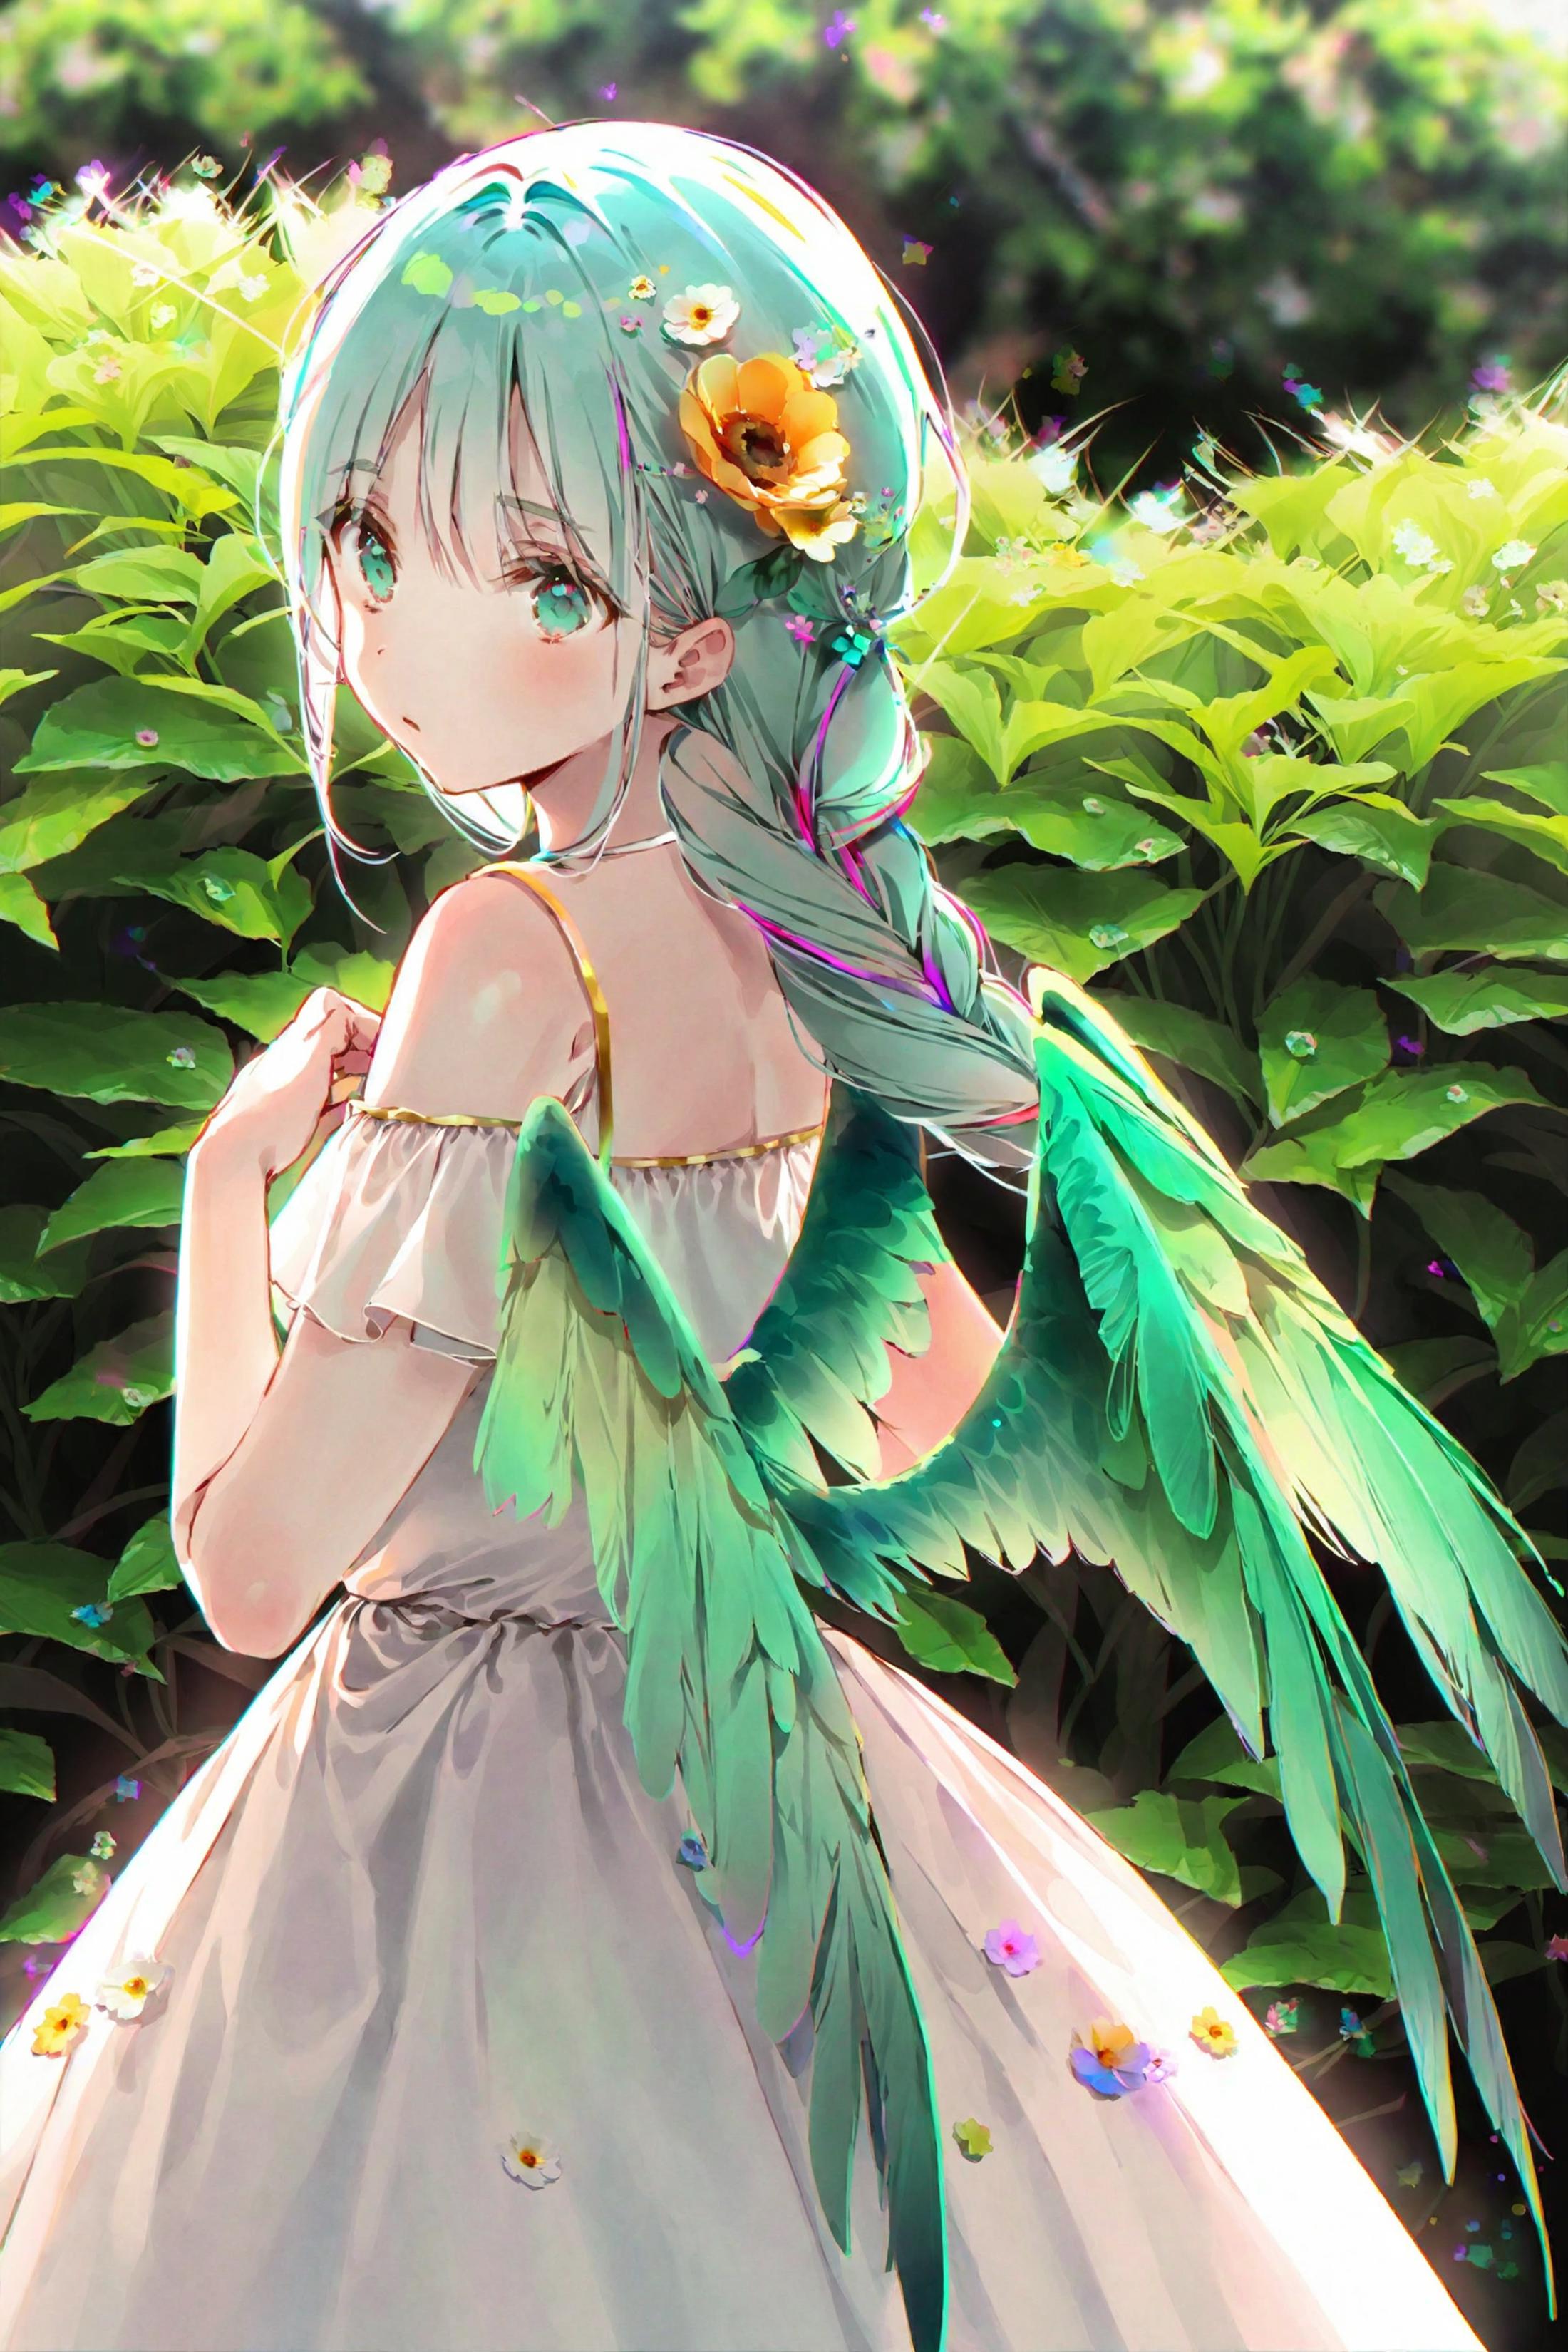 A cartoon illustration of a woman with a green dress, blue hair, and angel wings.